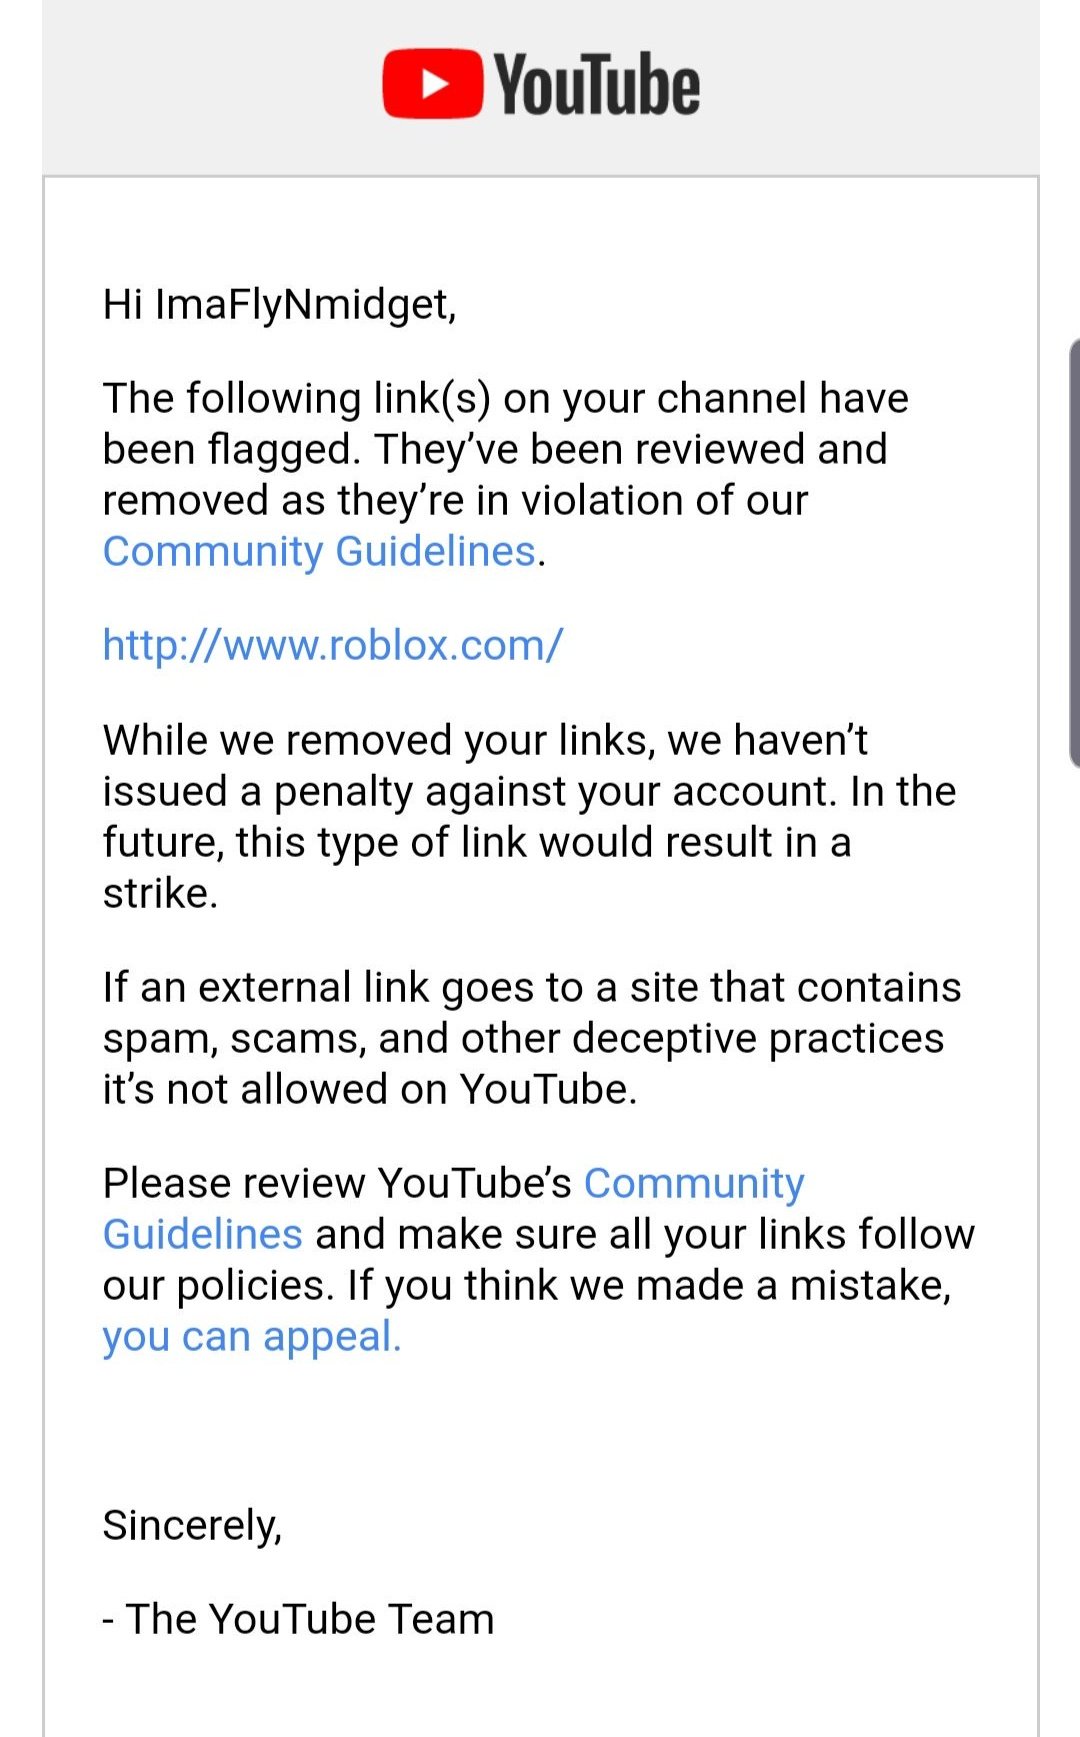 Bloxy News On Twitter Bloxynews Roblox Youtubers Beware Youtube Seems To Be Flagging Channels For Having Any Link Related To Https T Co 0nwnx59afv In The Description This Should Hopefully Be Fixed Soon And - roblox news youtube